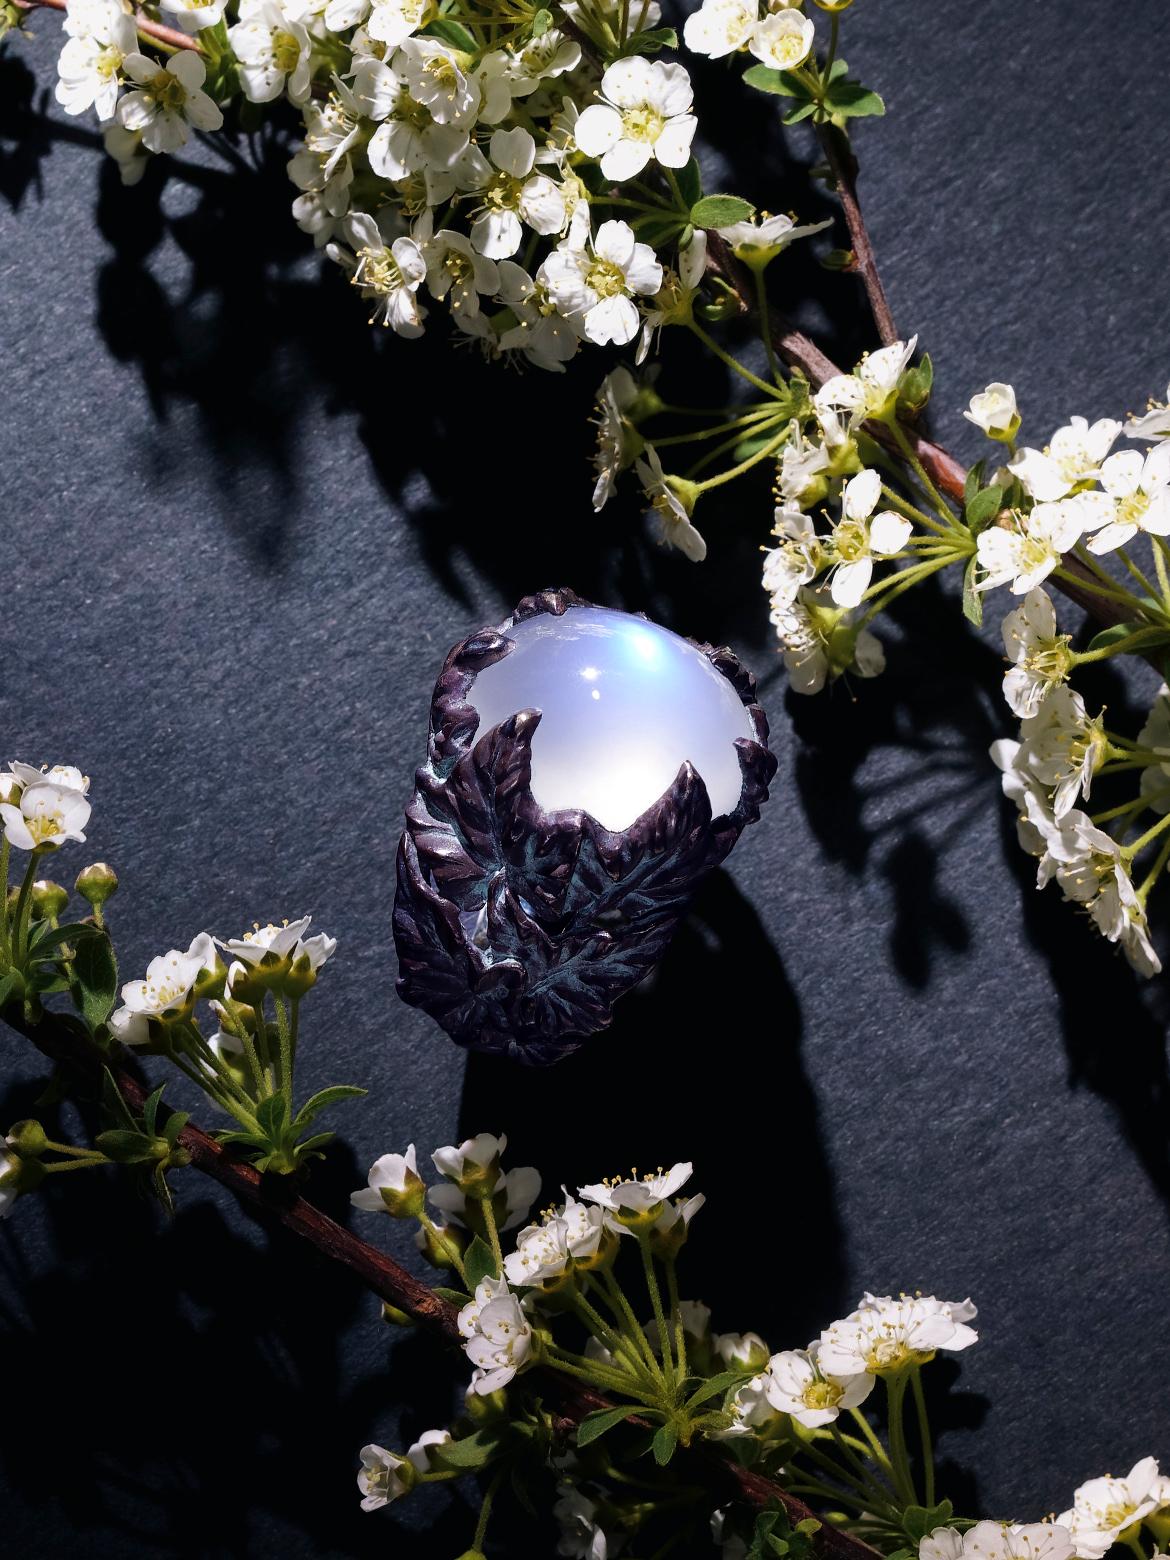 Natural Moonstone Blue Adularia ring in blackened silver
Moonstone origin - Tanzania
Moonstone measurements - 0.47 х 0.63 in / 12 х 16 mm
stone weight - 15 carats
ring size - 8.5 US - 58 EU
ring weight - 15.3 grams


We ship our jewelry worldwide –